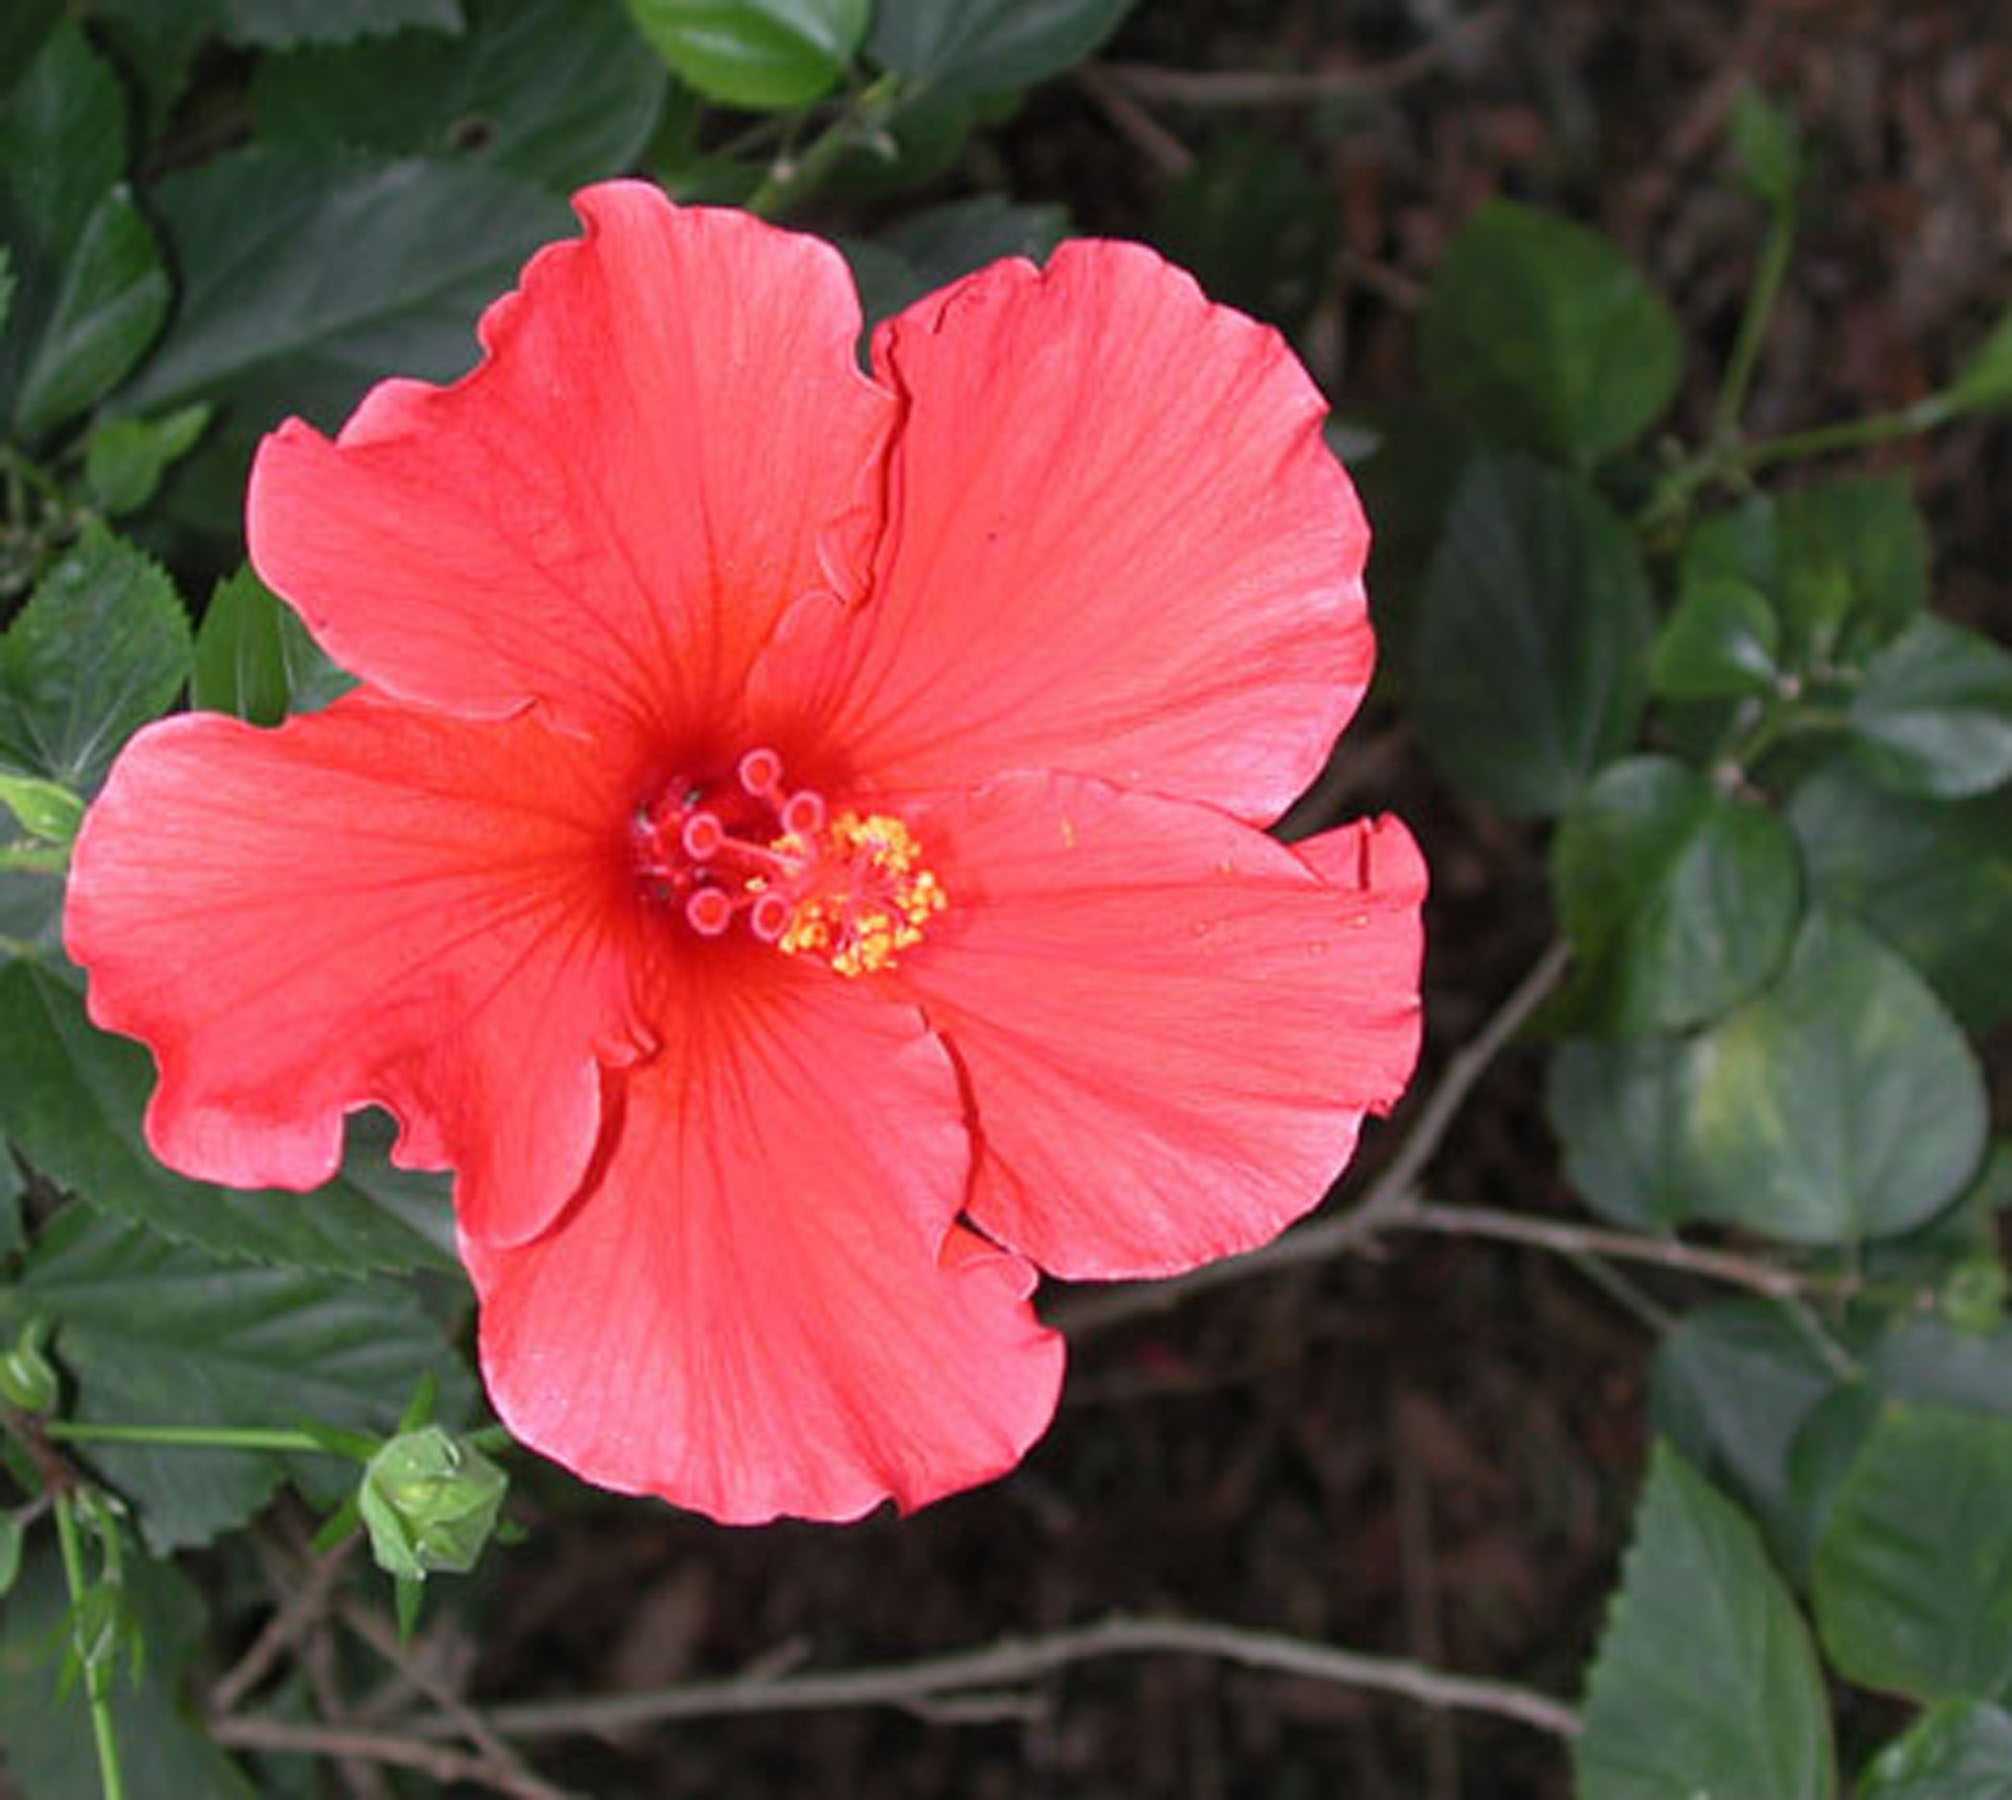 Hibiscus. Photo by Lucy Beebe Tobias